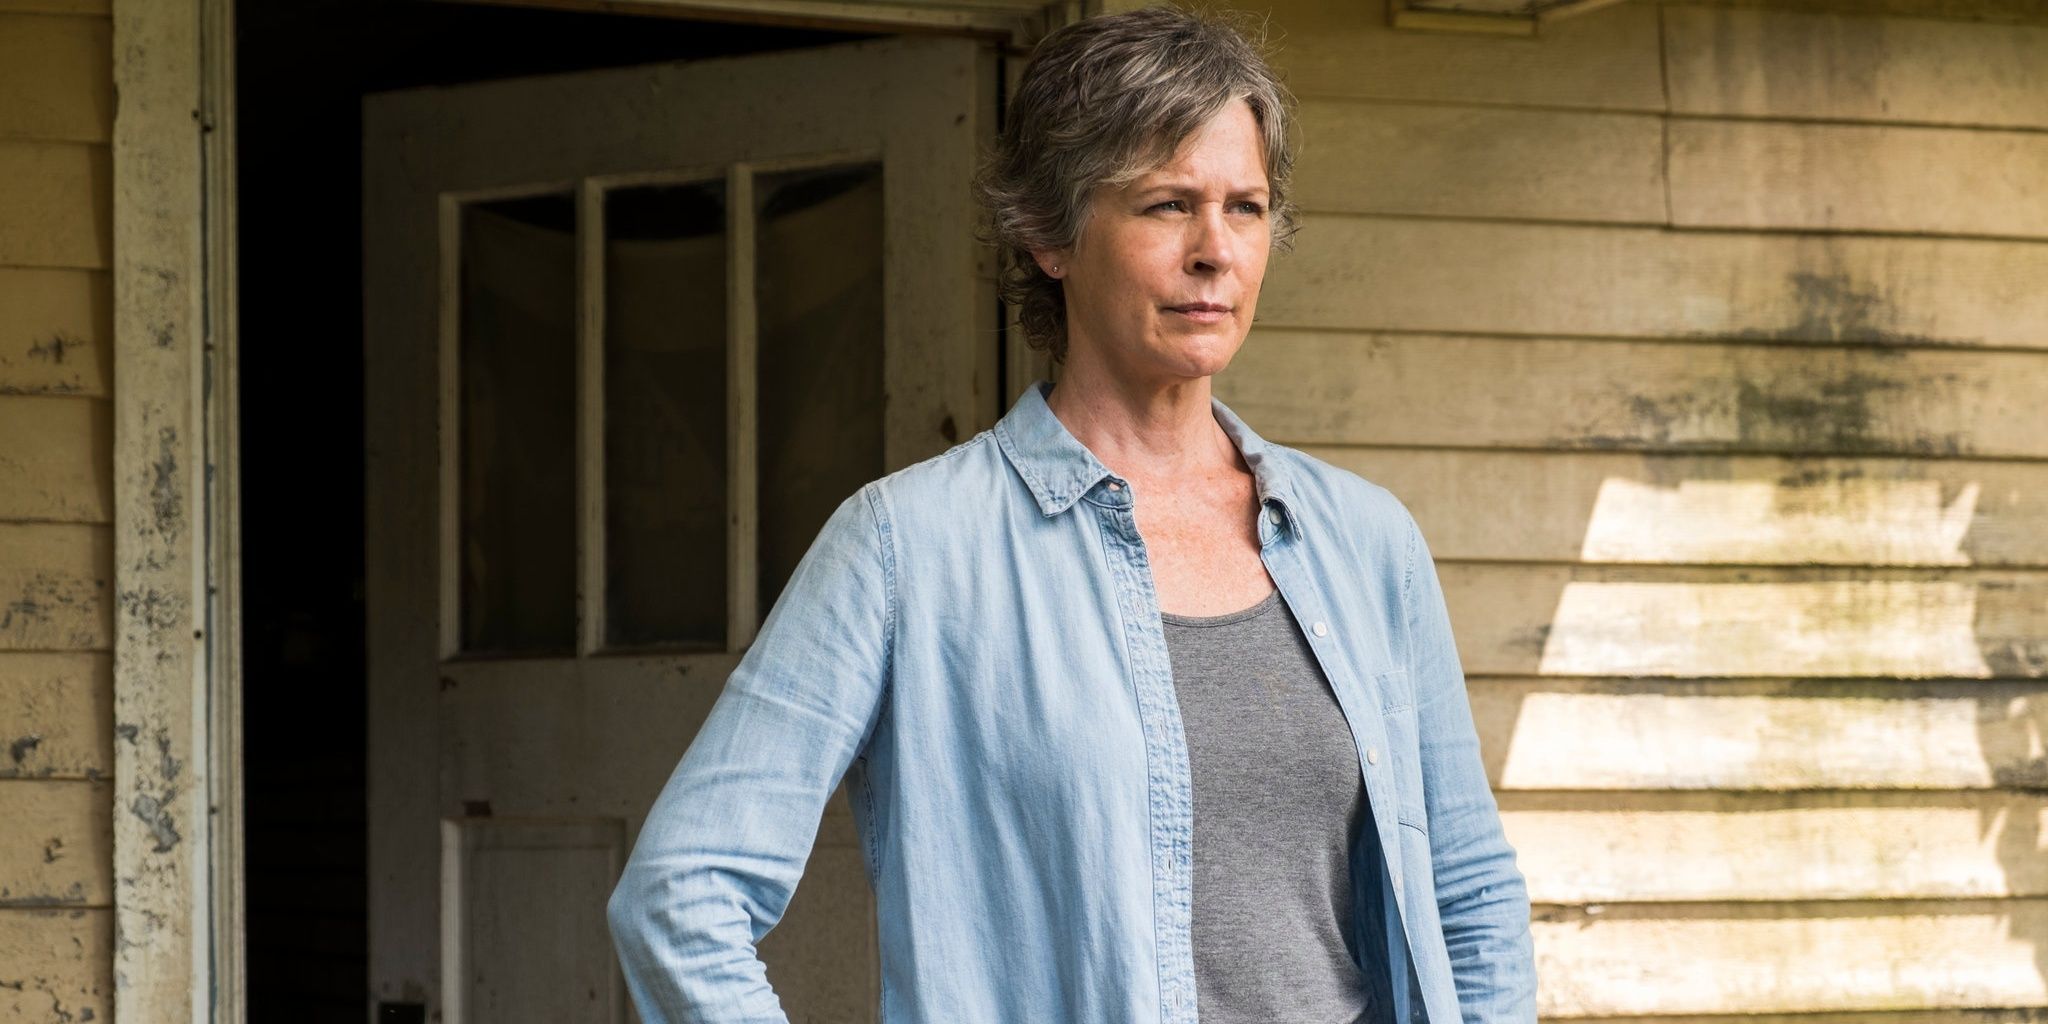 Carol stands with hands on hips in The Walking Dead